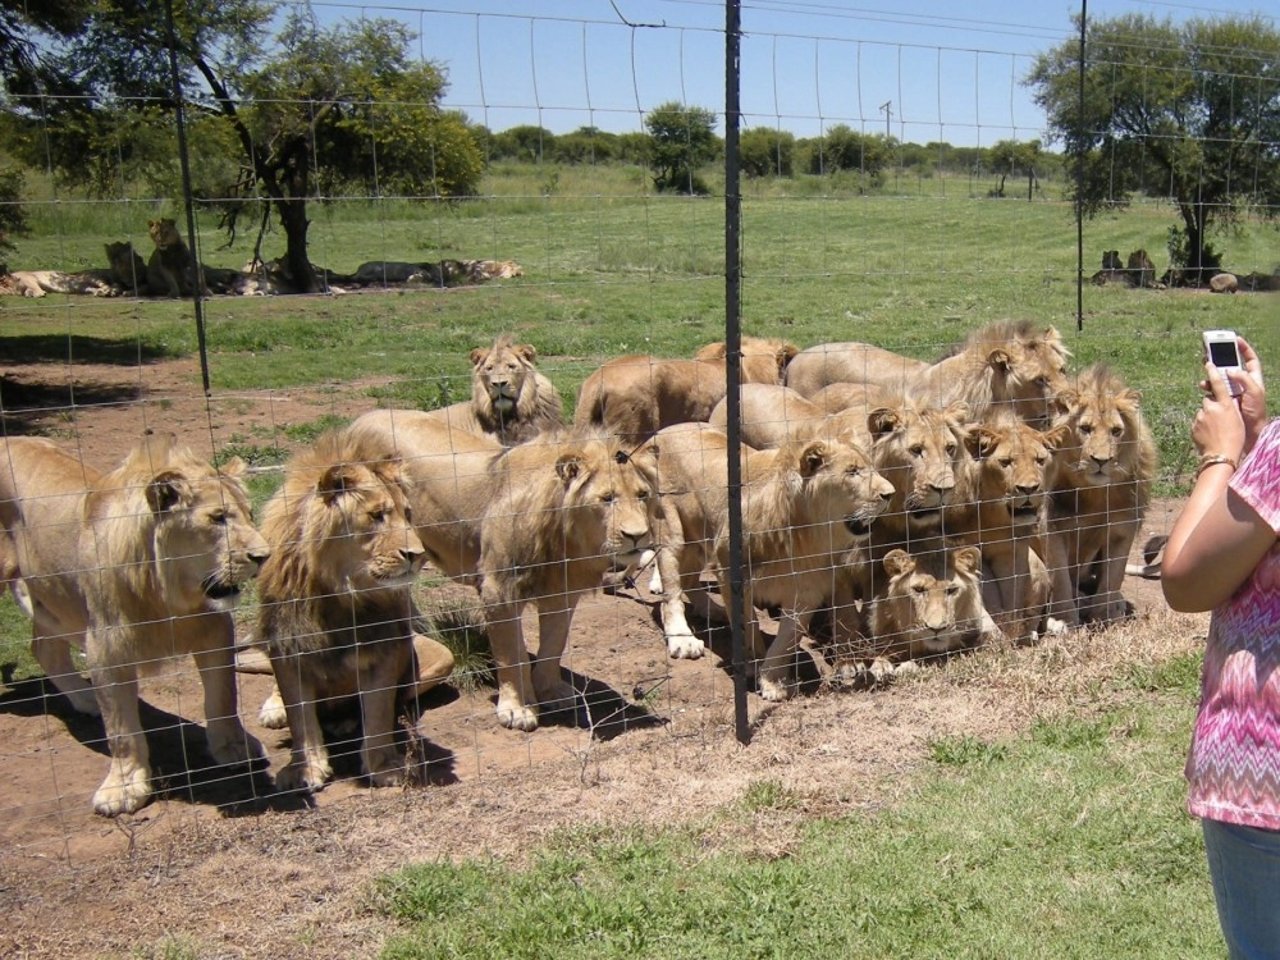 Lions in a facility in South Africa - image by Blood Lions